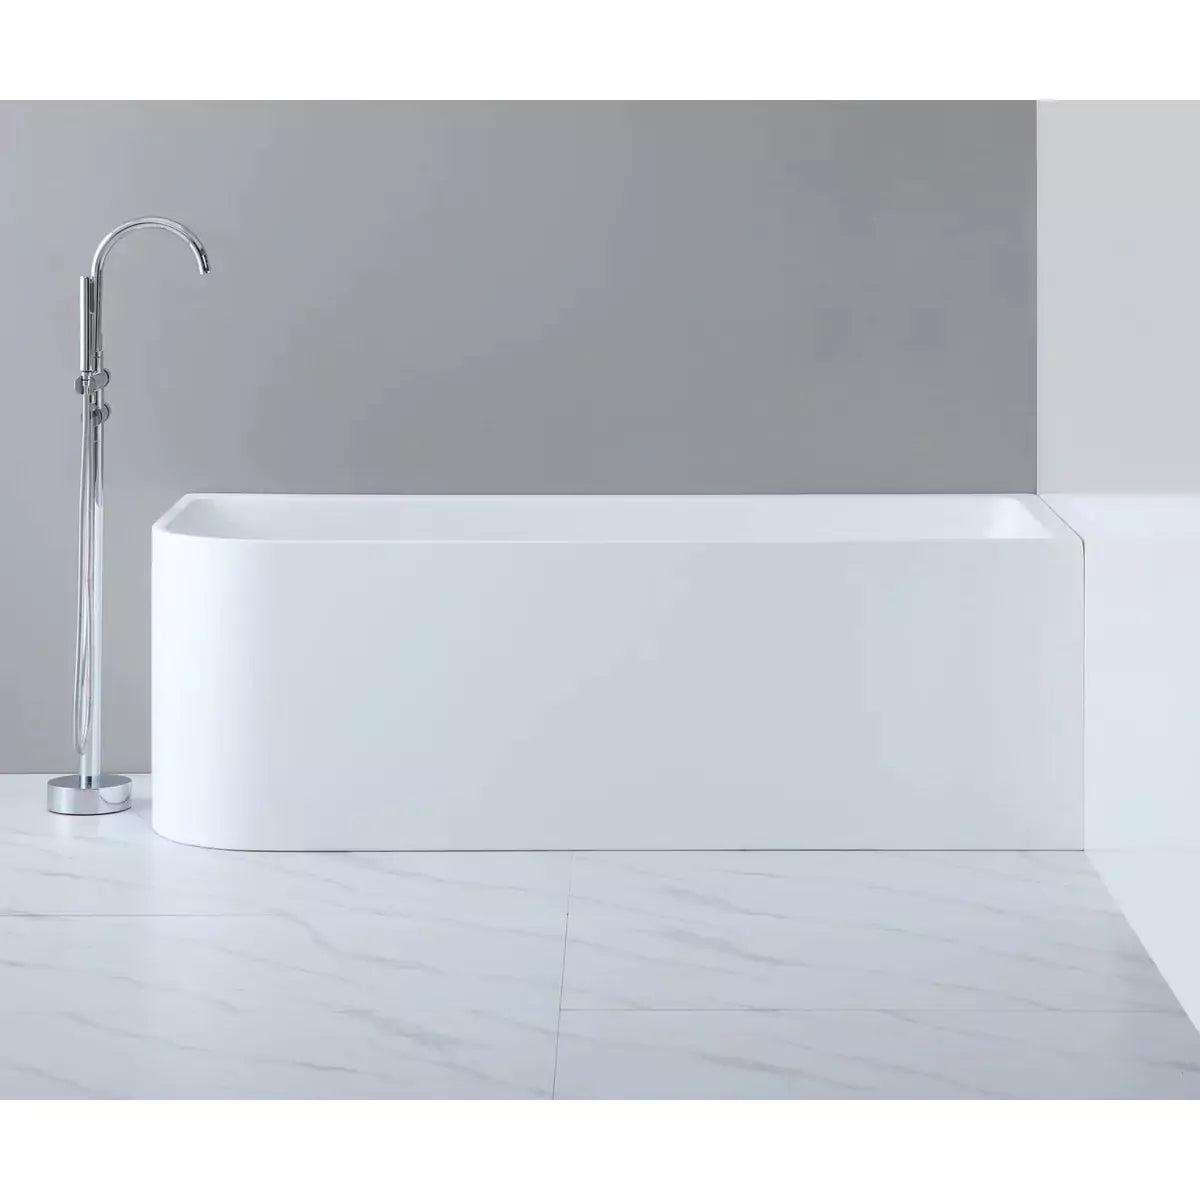 Glossy White Multi-Fit Bathtub, Versatile for Various Installations-CBT1400R-580